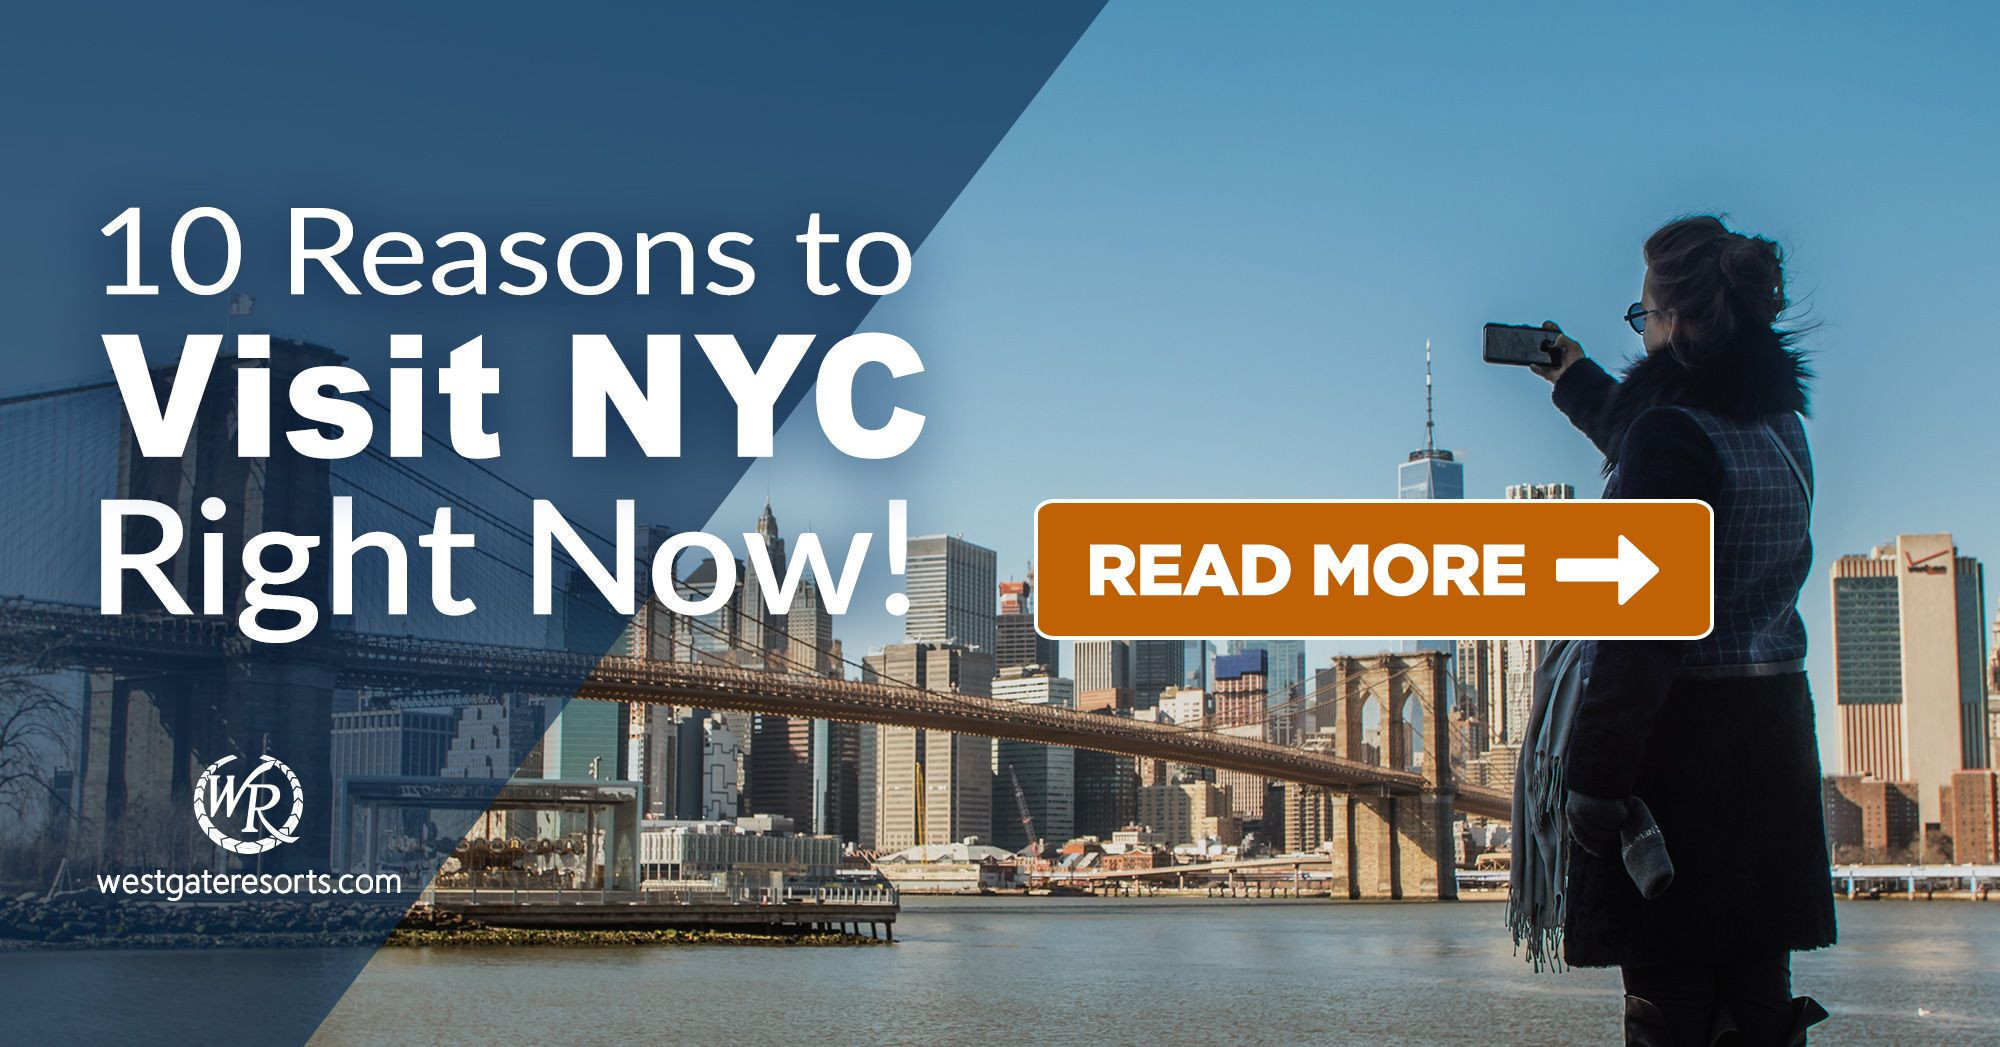 10 Reasons to Visit NYC Right Now!